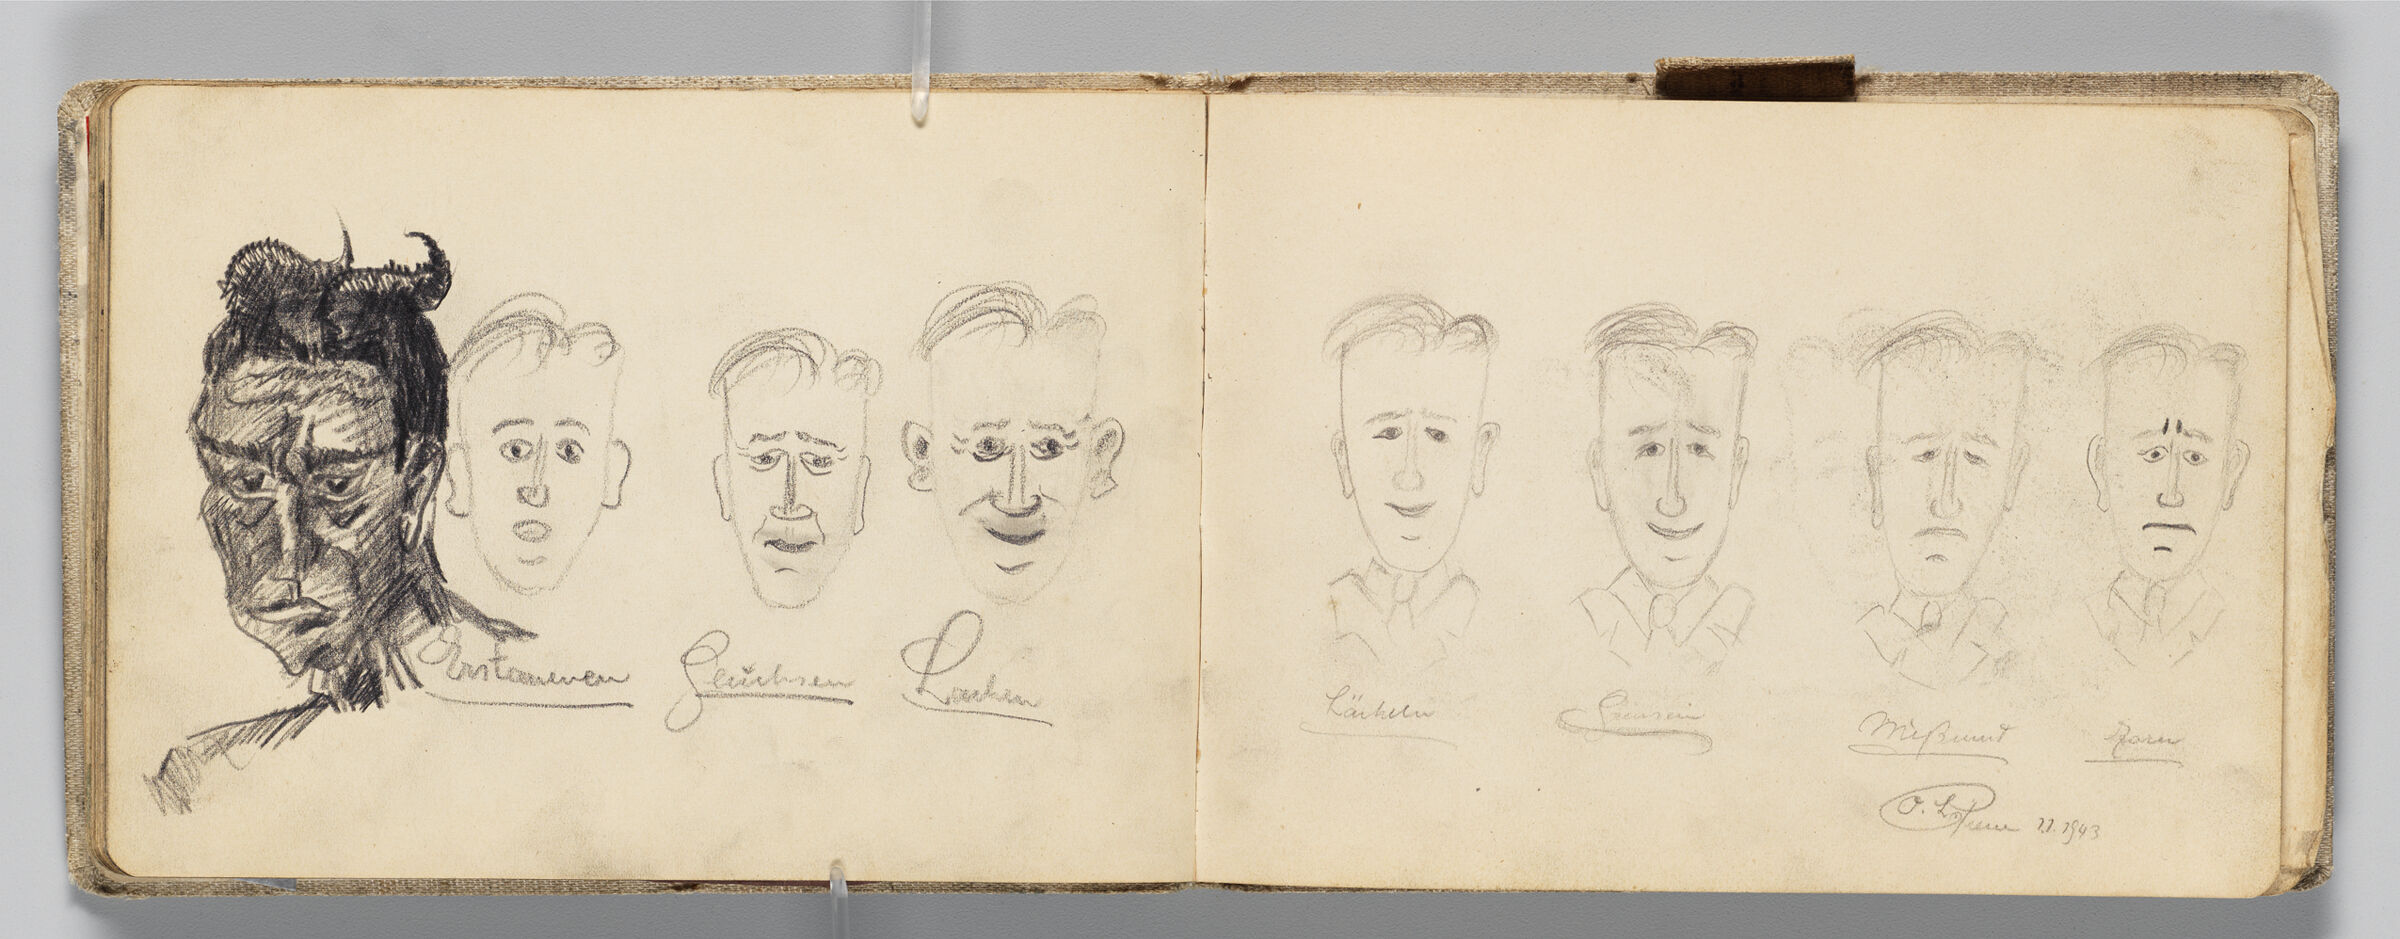 Untitled (Sketches Of Facial Expressions, Two-Page Spread)